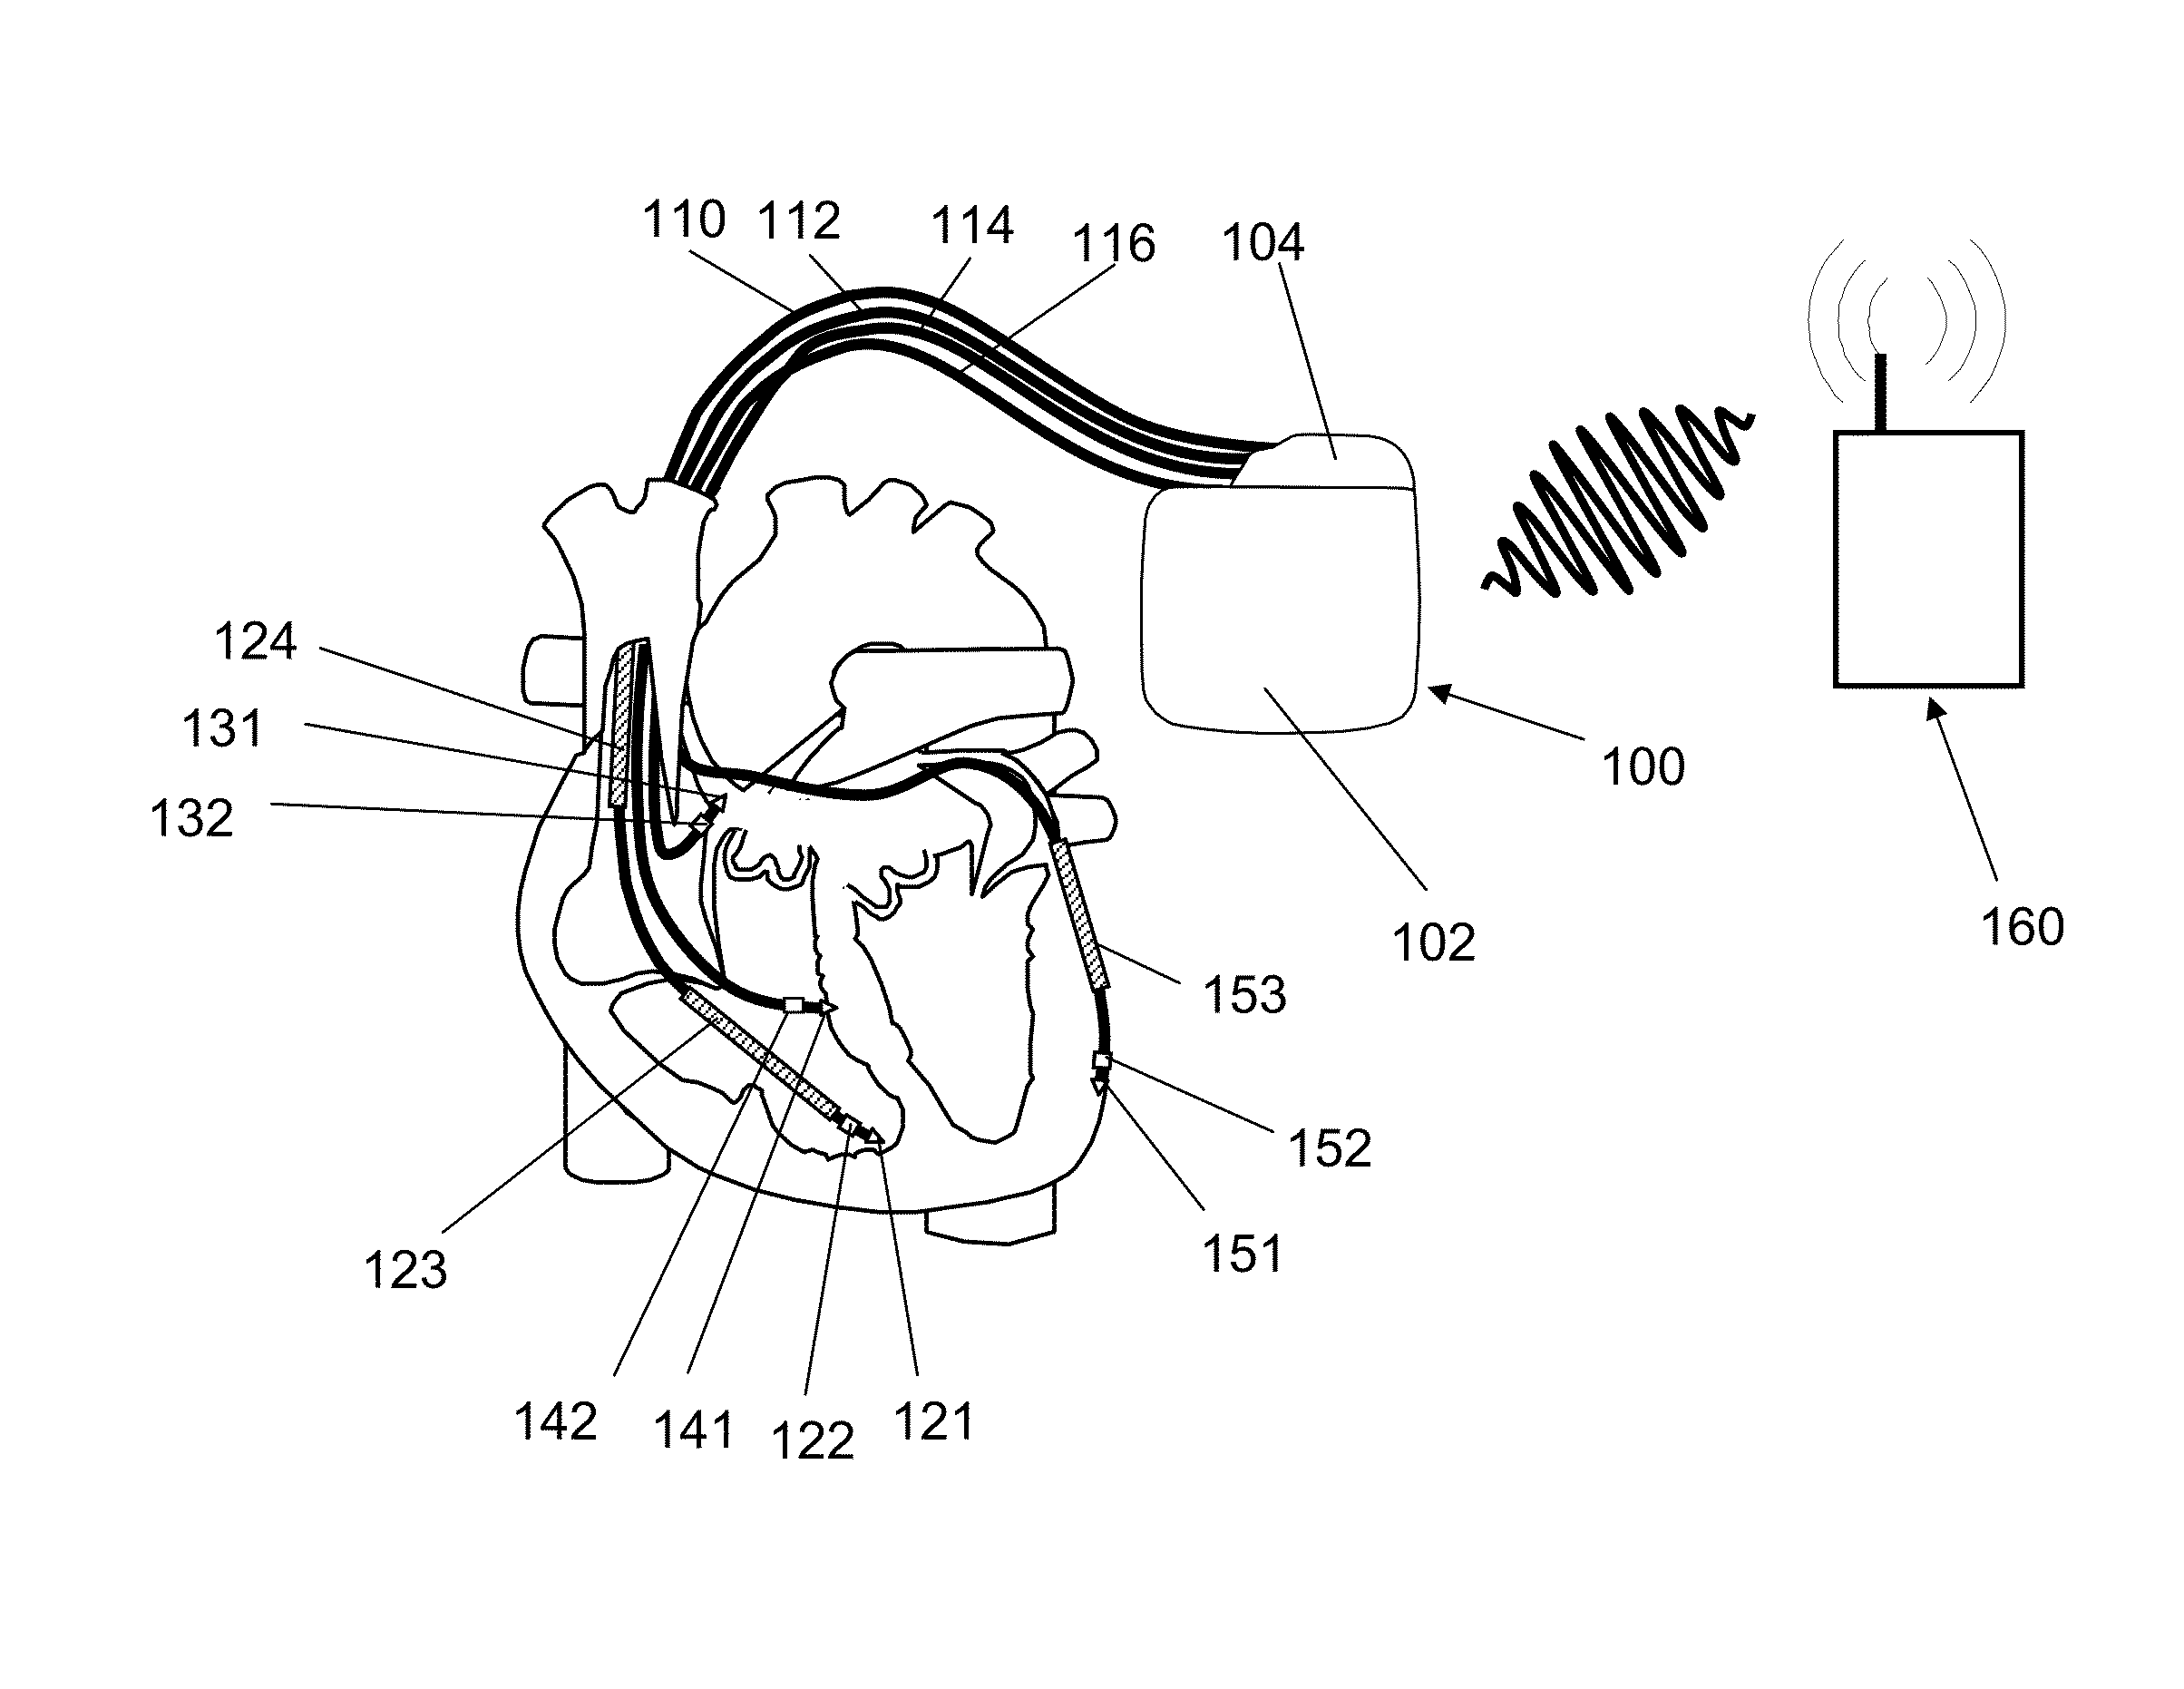 Cardiac stimulator for delivery of cardiac contractility modulation therapy